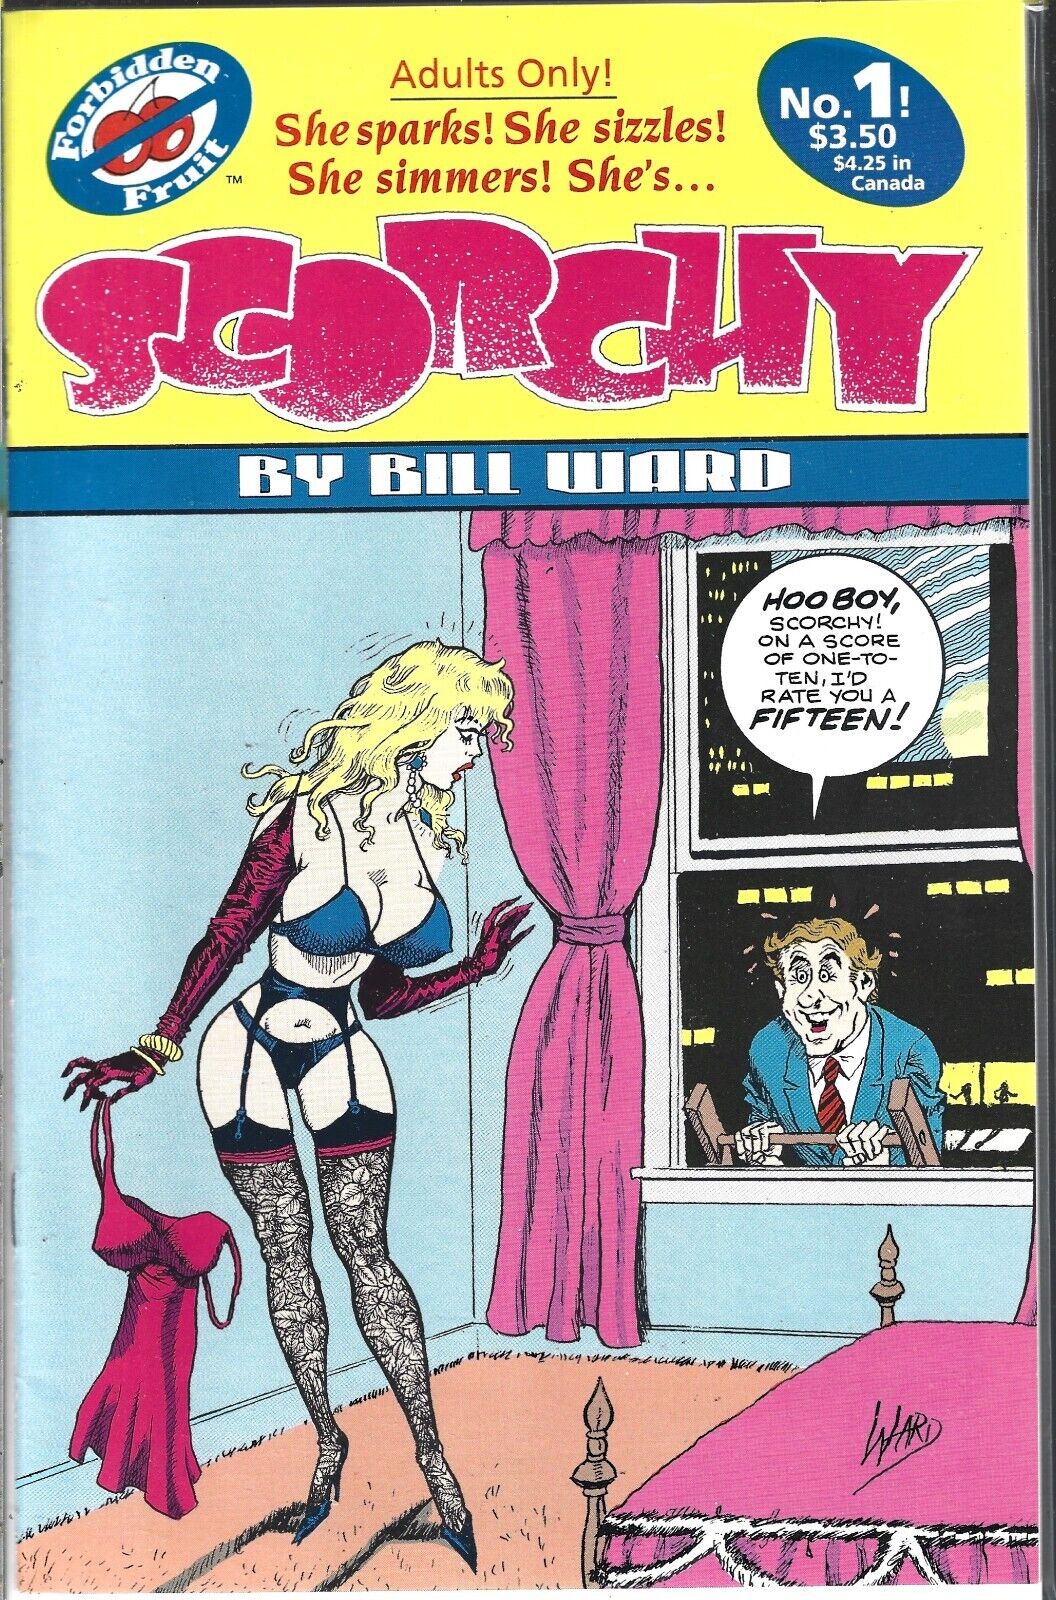 SCORCHY #1 (FN/VF) BRONZE AGE, BILL WARD, HTF, $3.95 FLAT RATE SHIPPING IN STORE